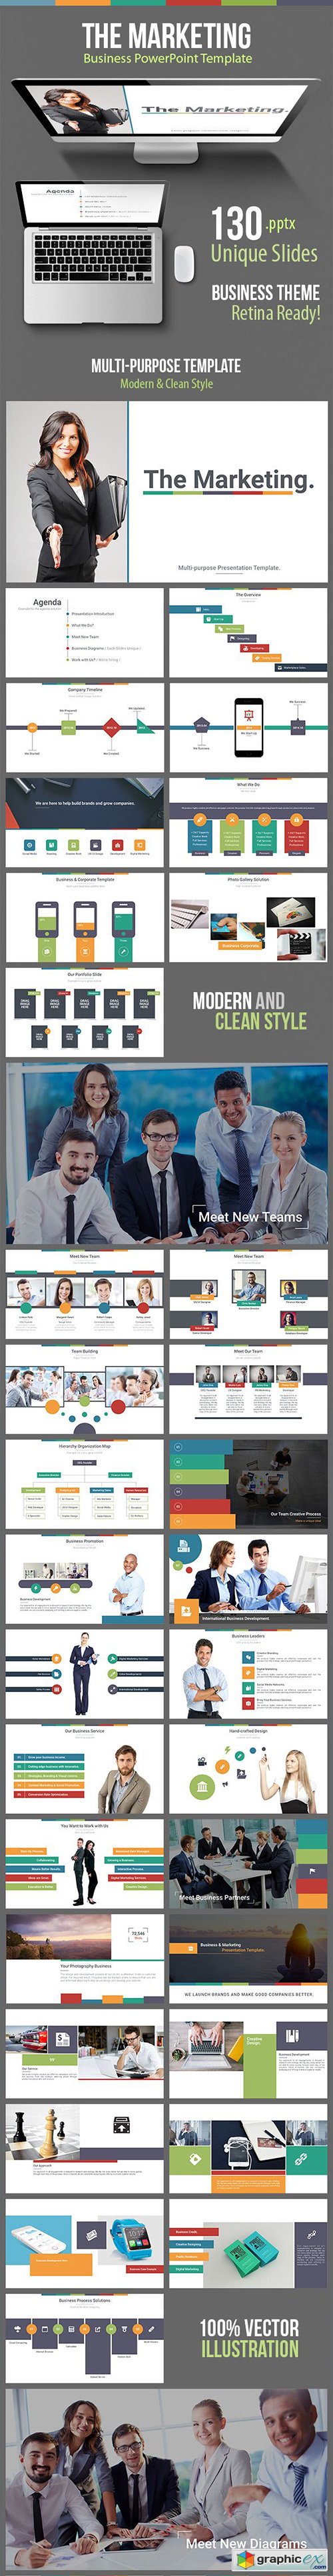 The Marketing - Business Powerpoint Template